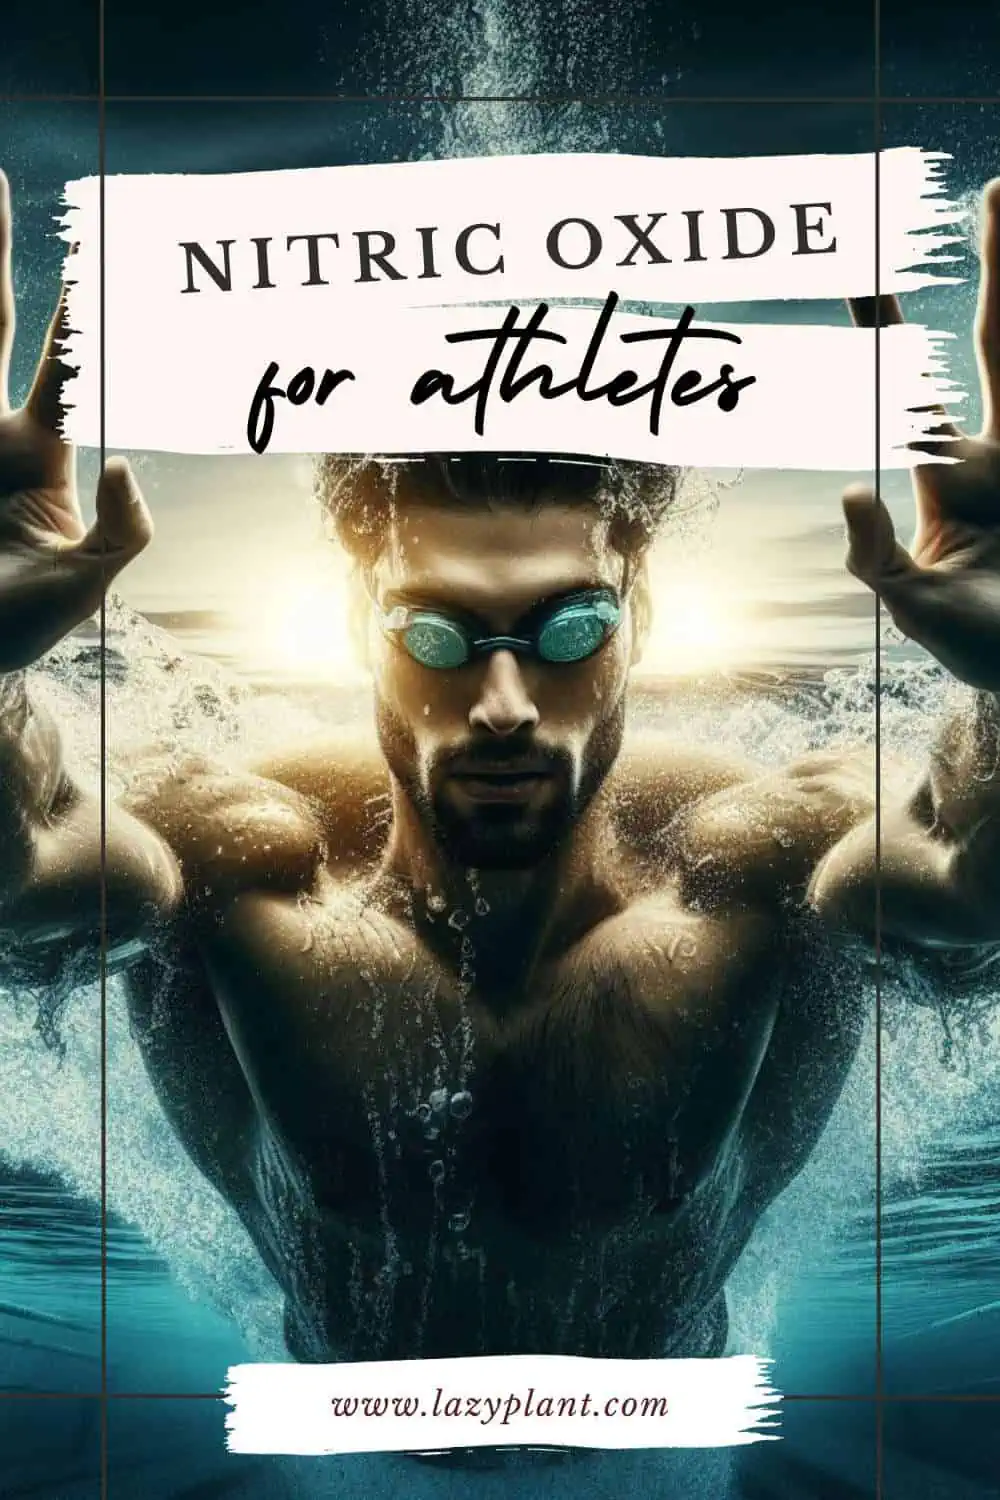 Benefits of a nitric oxide-rich diet for athletes.